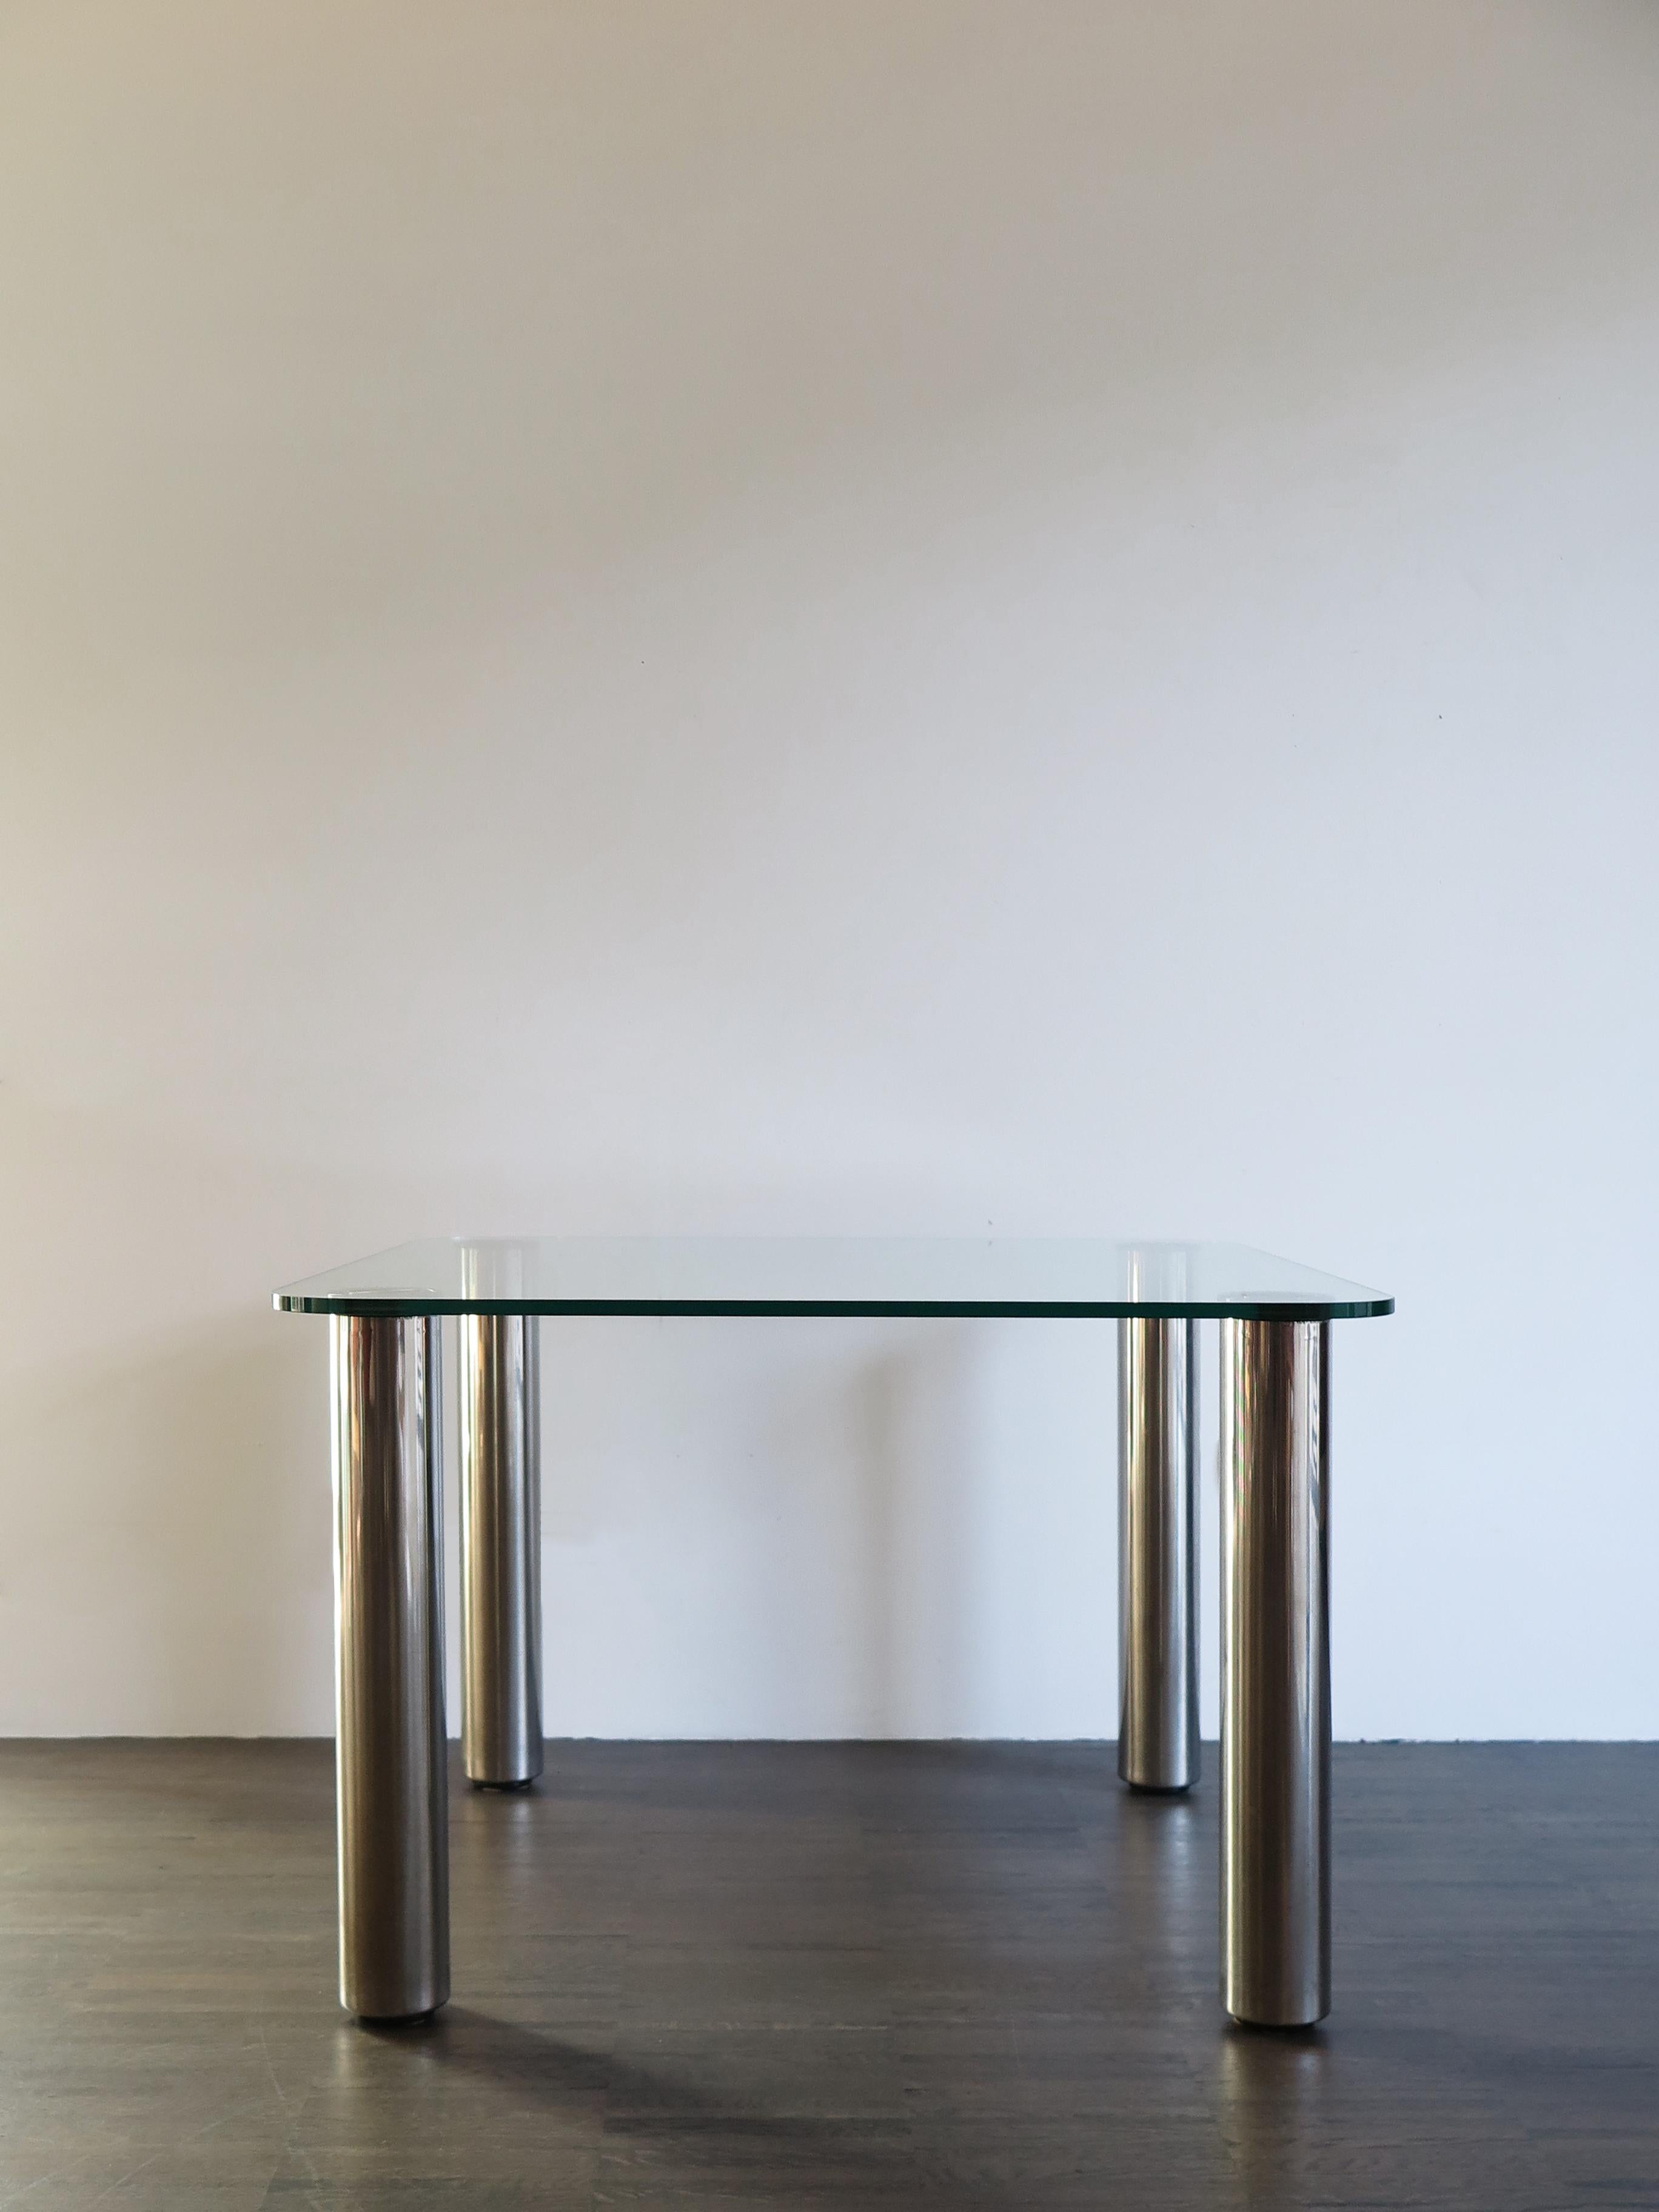 Italian midcentury dining table model Marcuso designed by Marco Zanuso and produced by Zanotto since 1969 with thick glass top and stainless steel legs.
Zanotta trademark engraved on the legs.

Nominated for the Compasso d’Oro